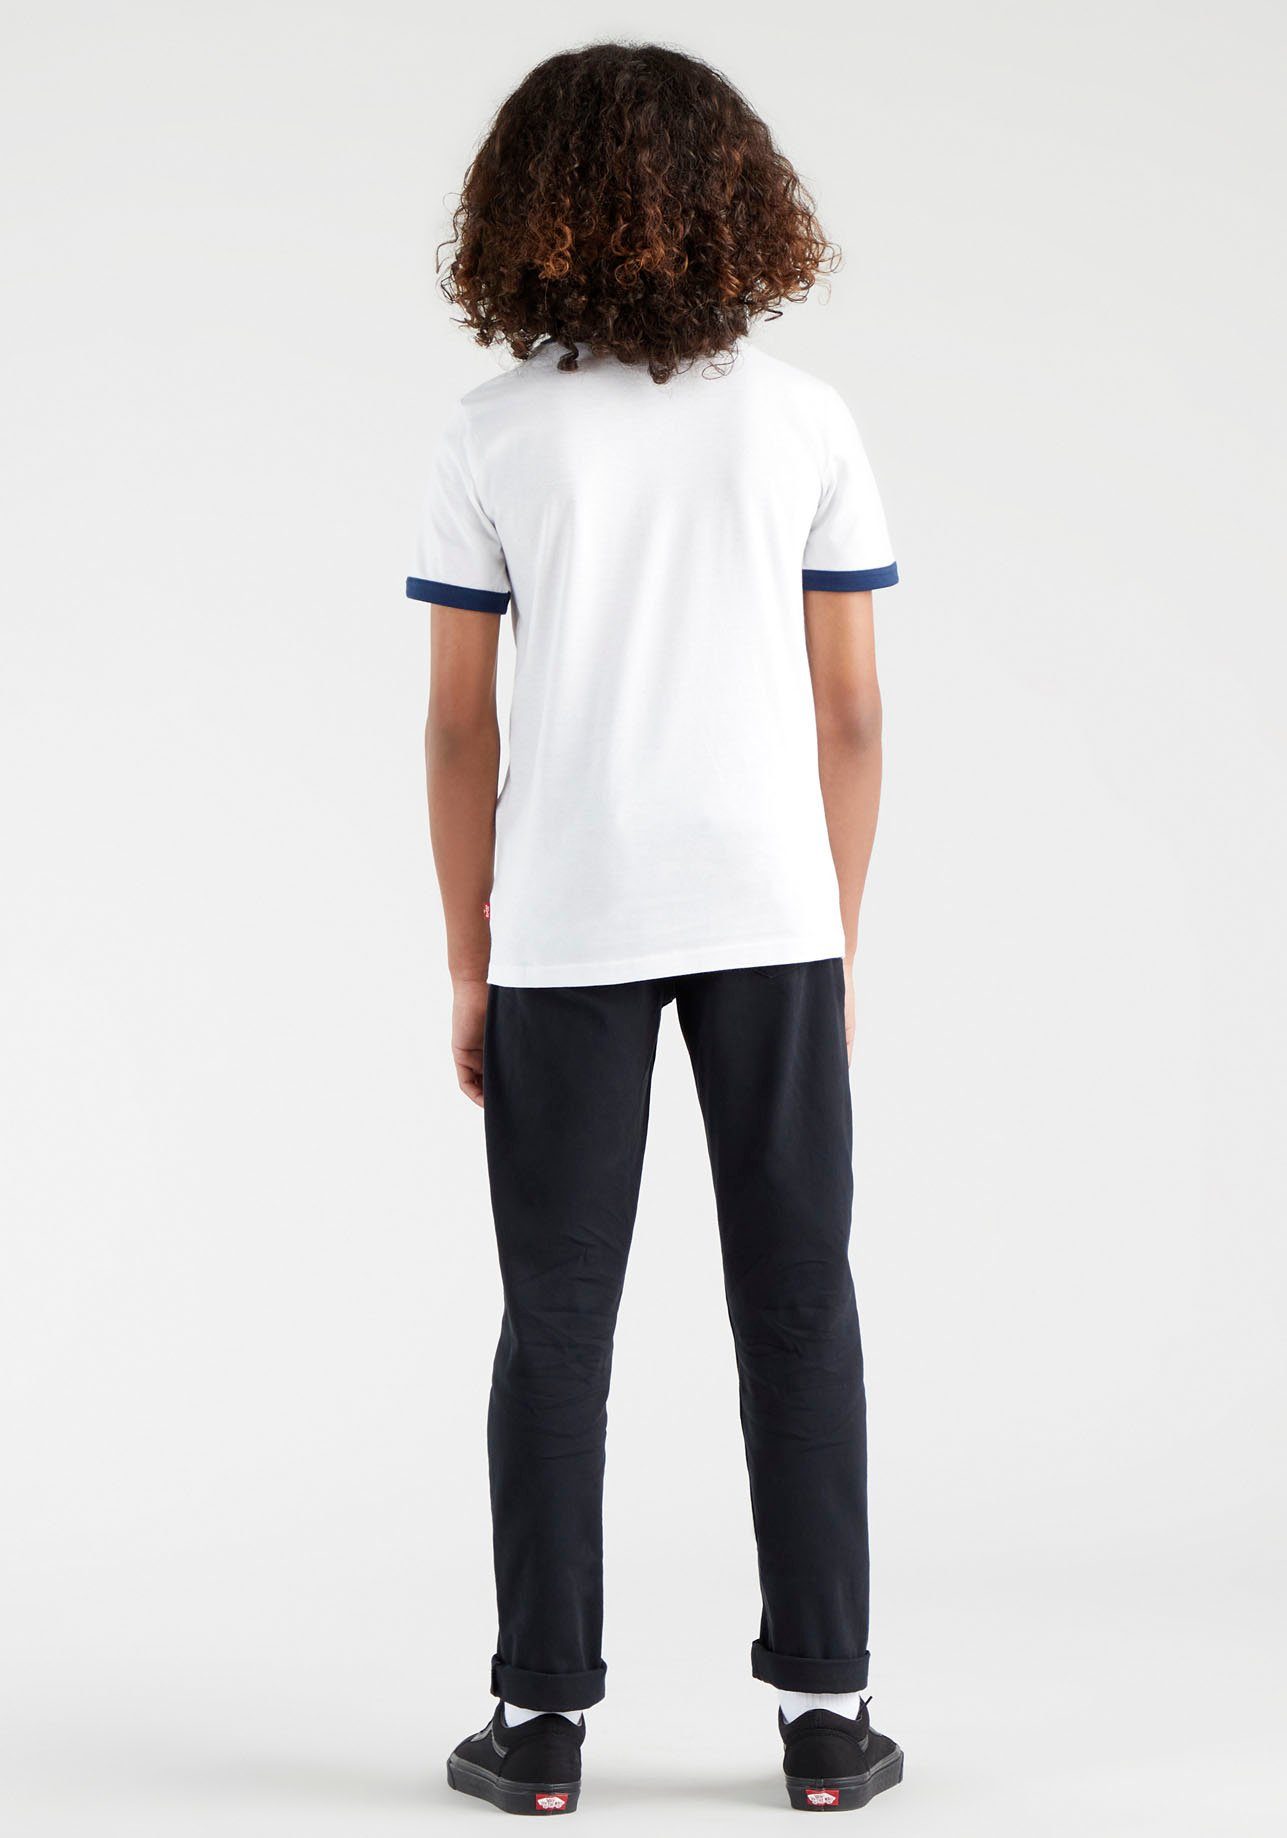 T-Shirt BATWING Kids Levi's® for BOYS weiß TEE RINGER